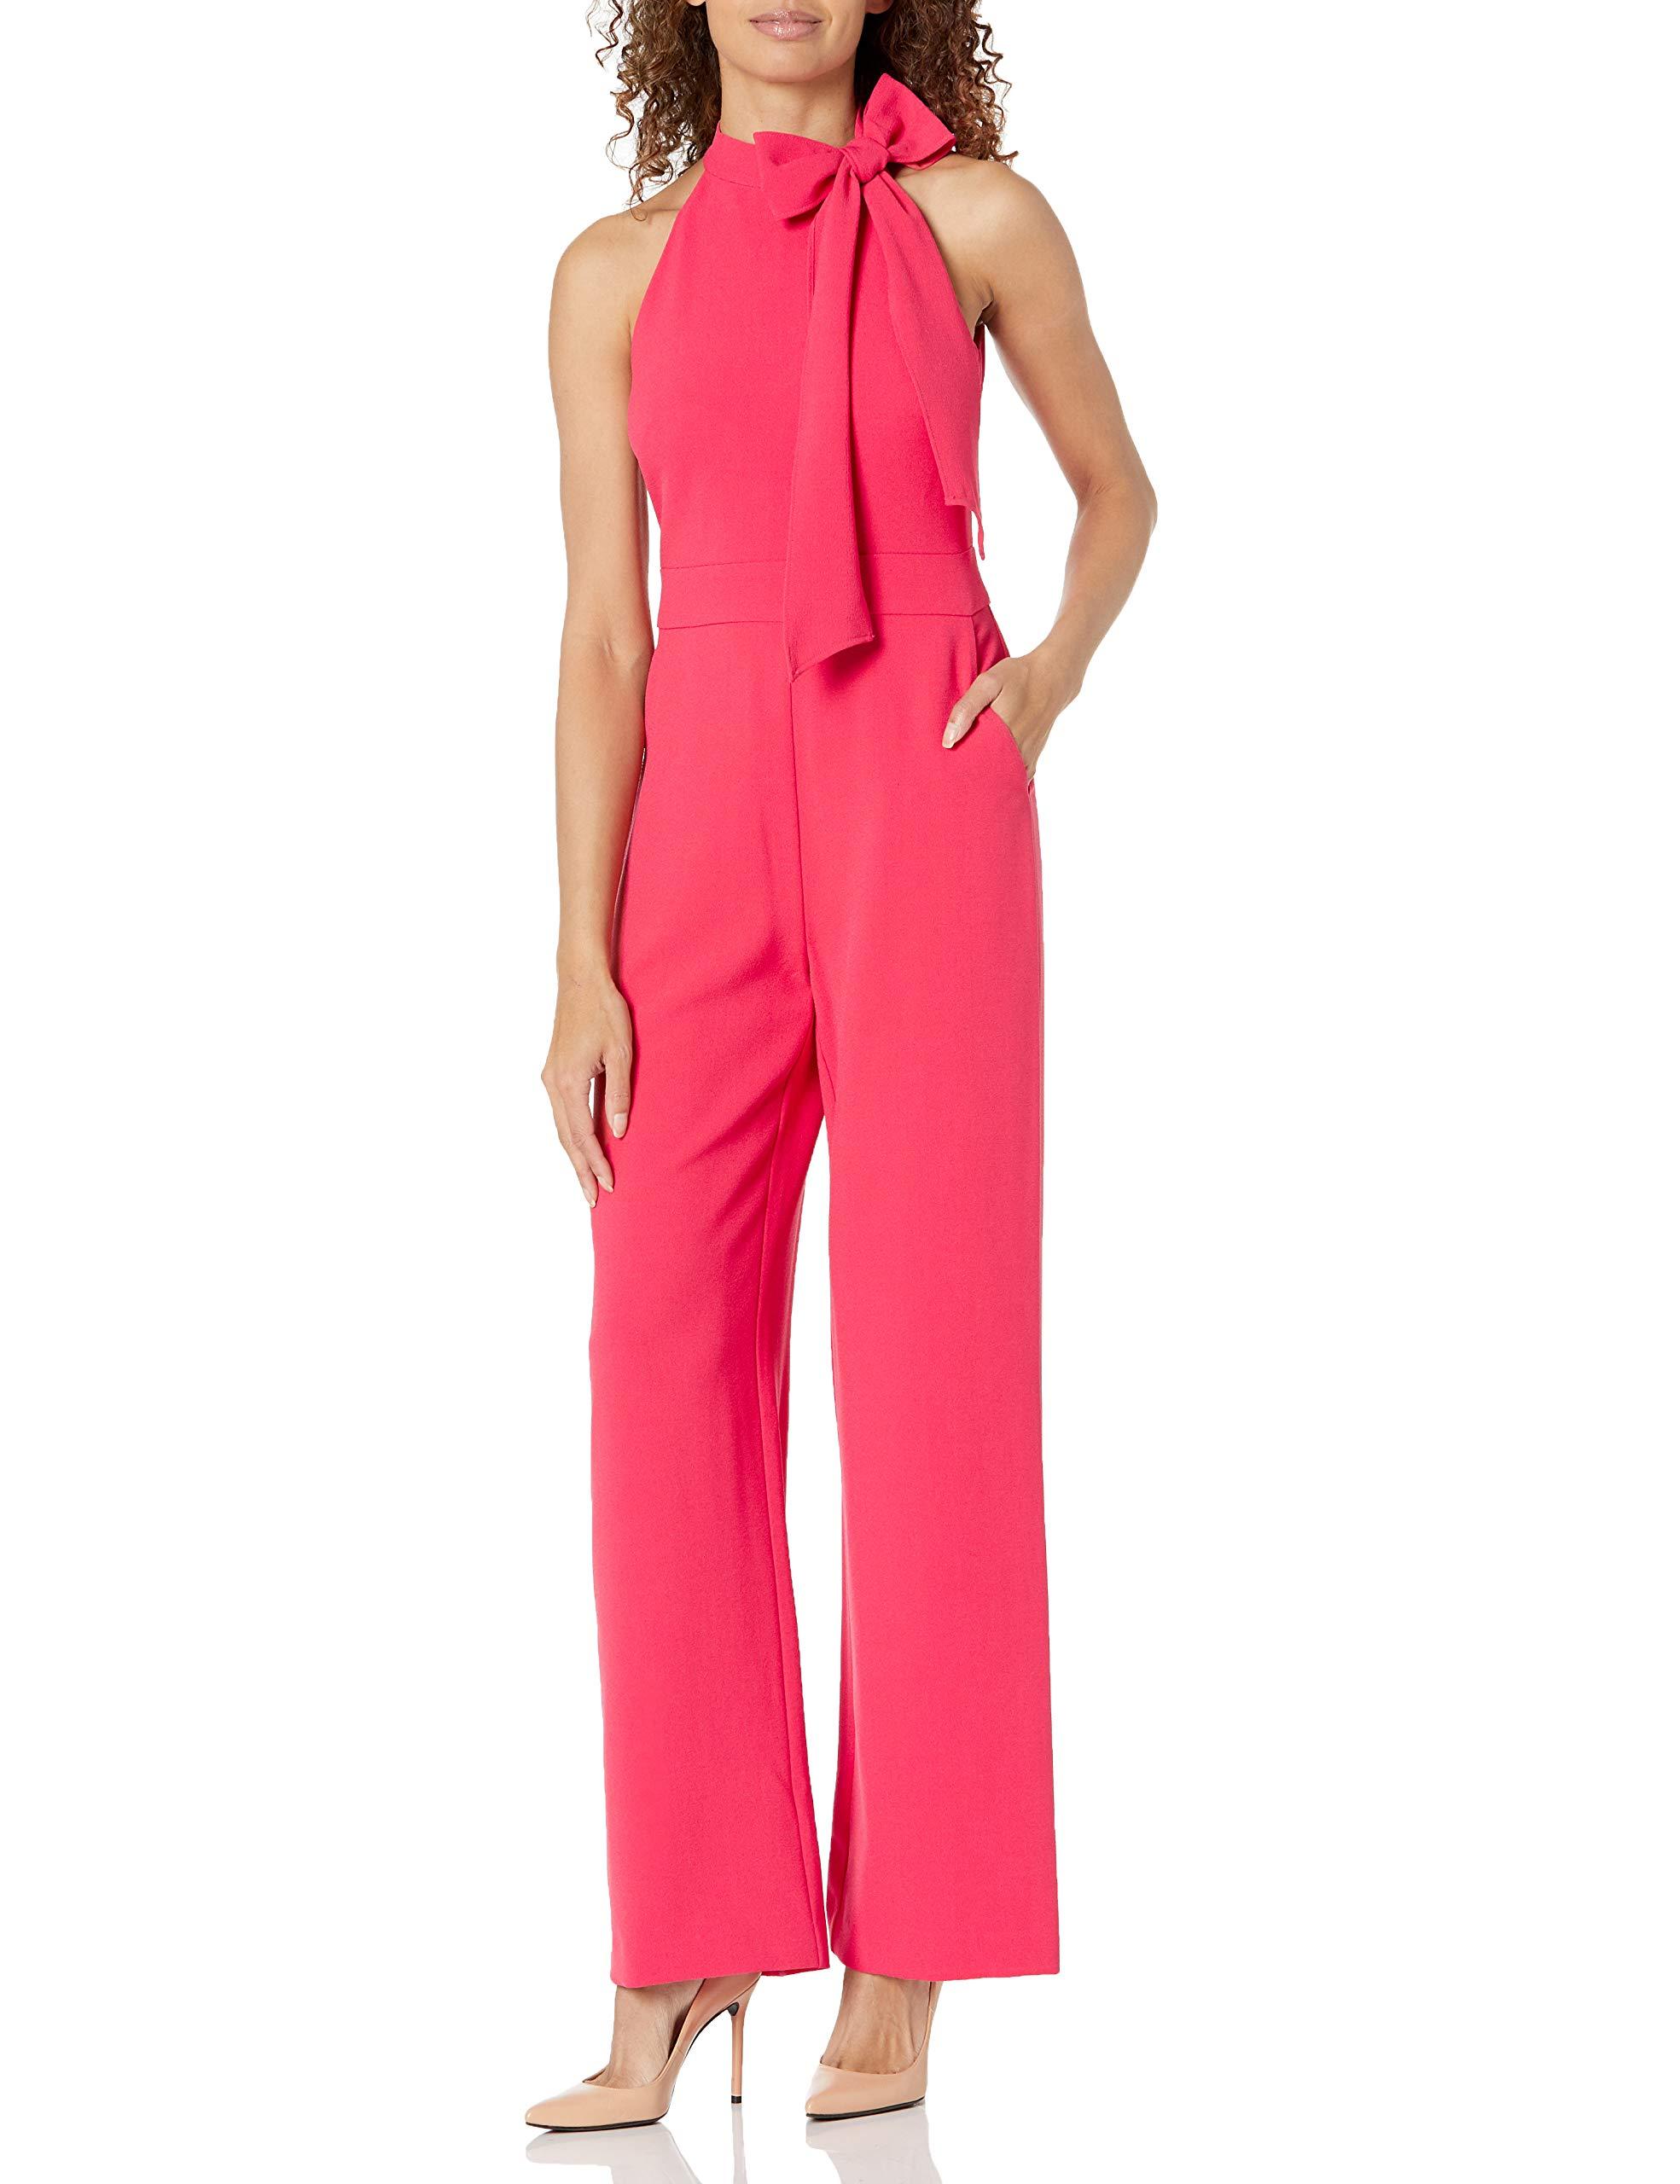 Vince Camuto Signature Stretch Crepe Bow Neck Jumpsuit in Pink | Lyst